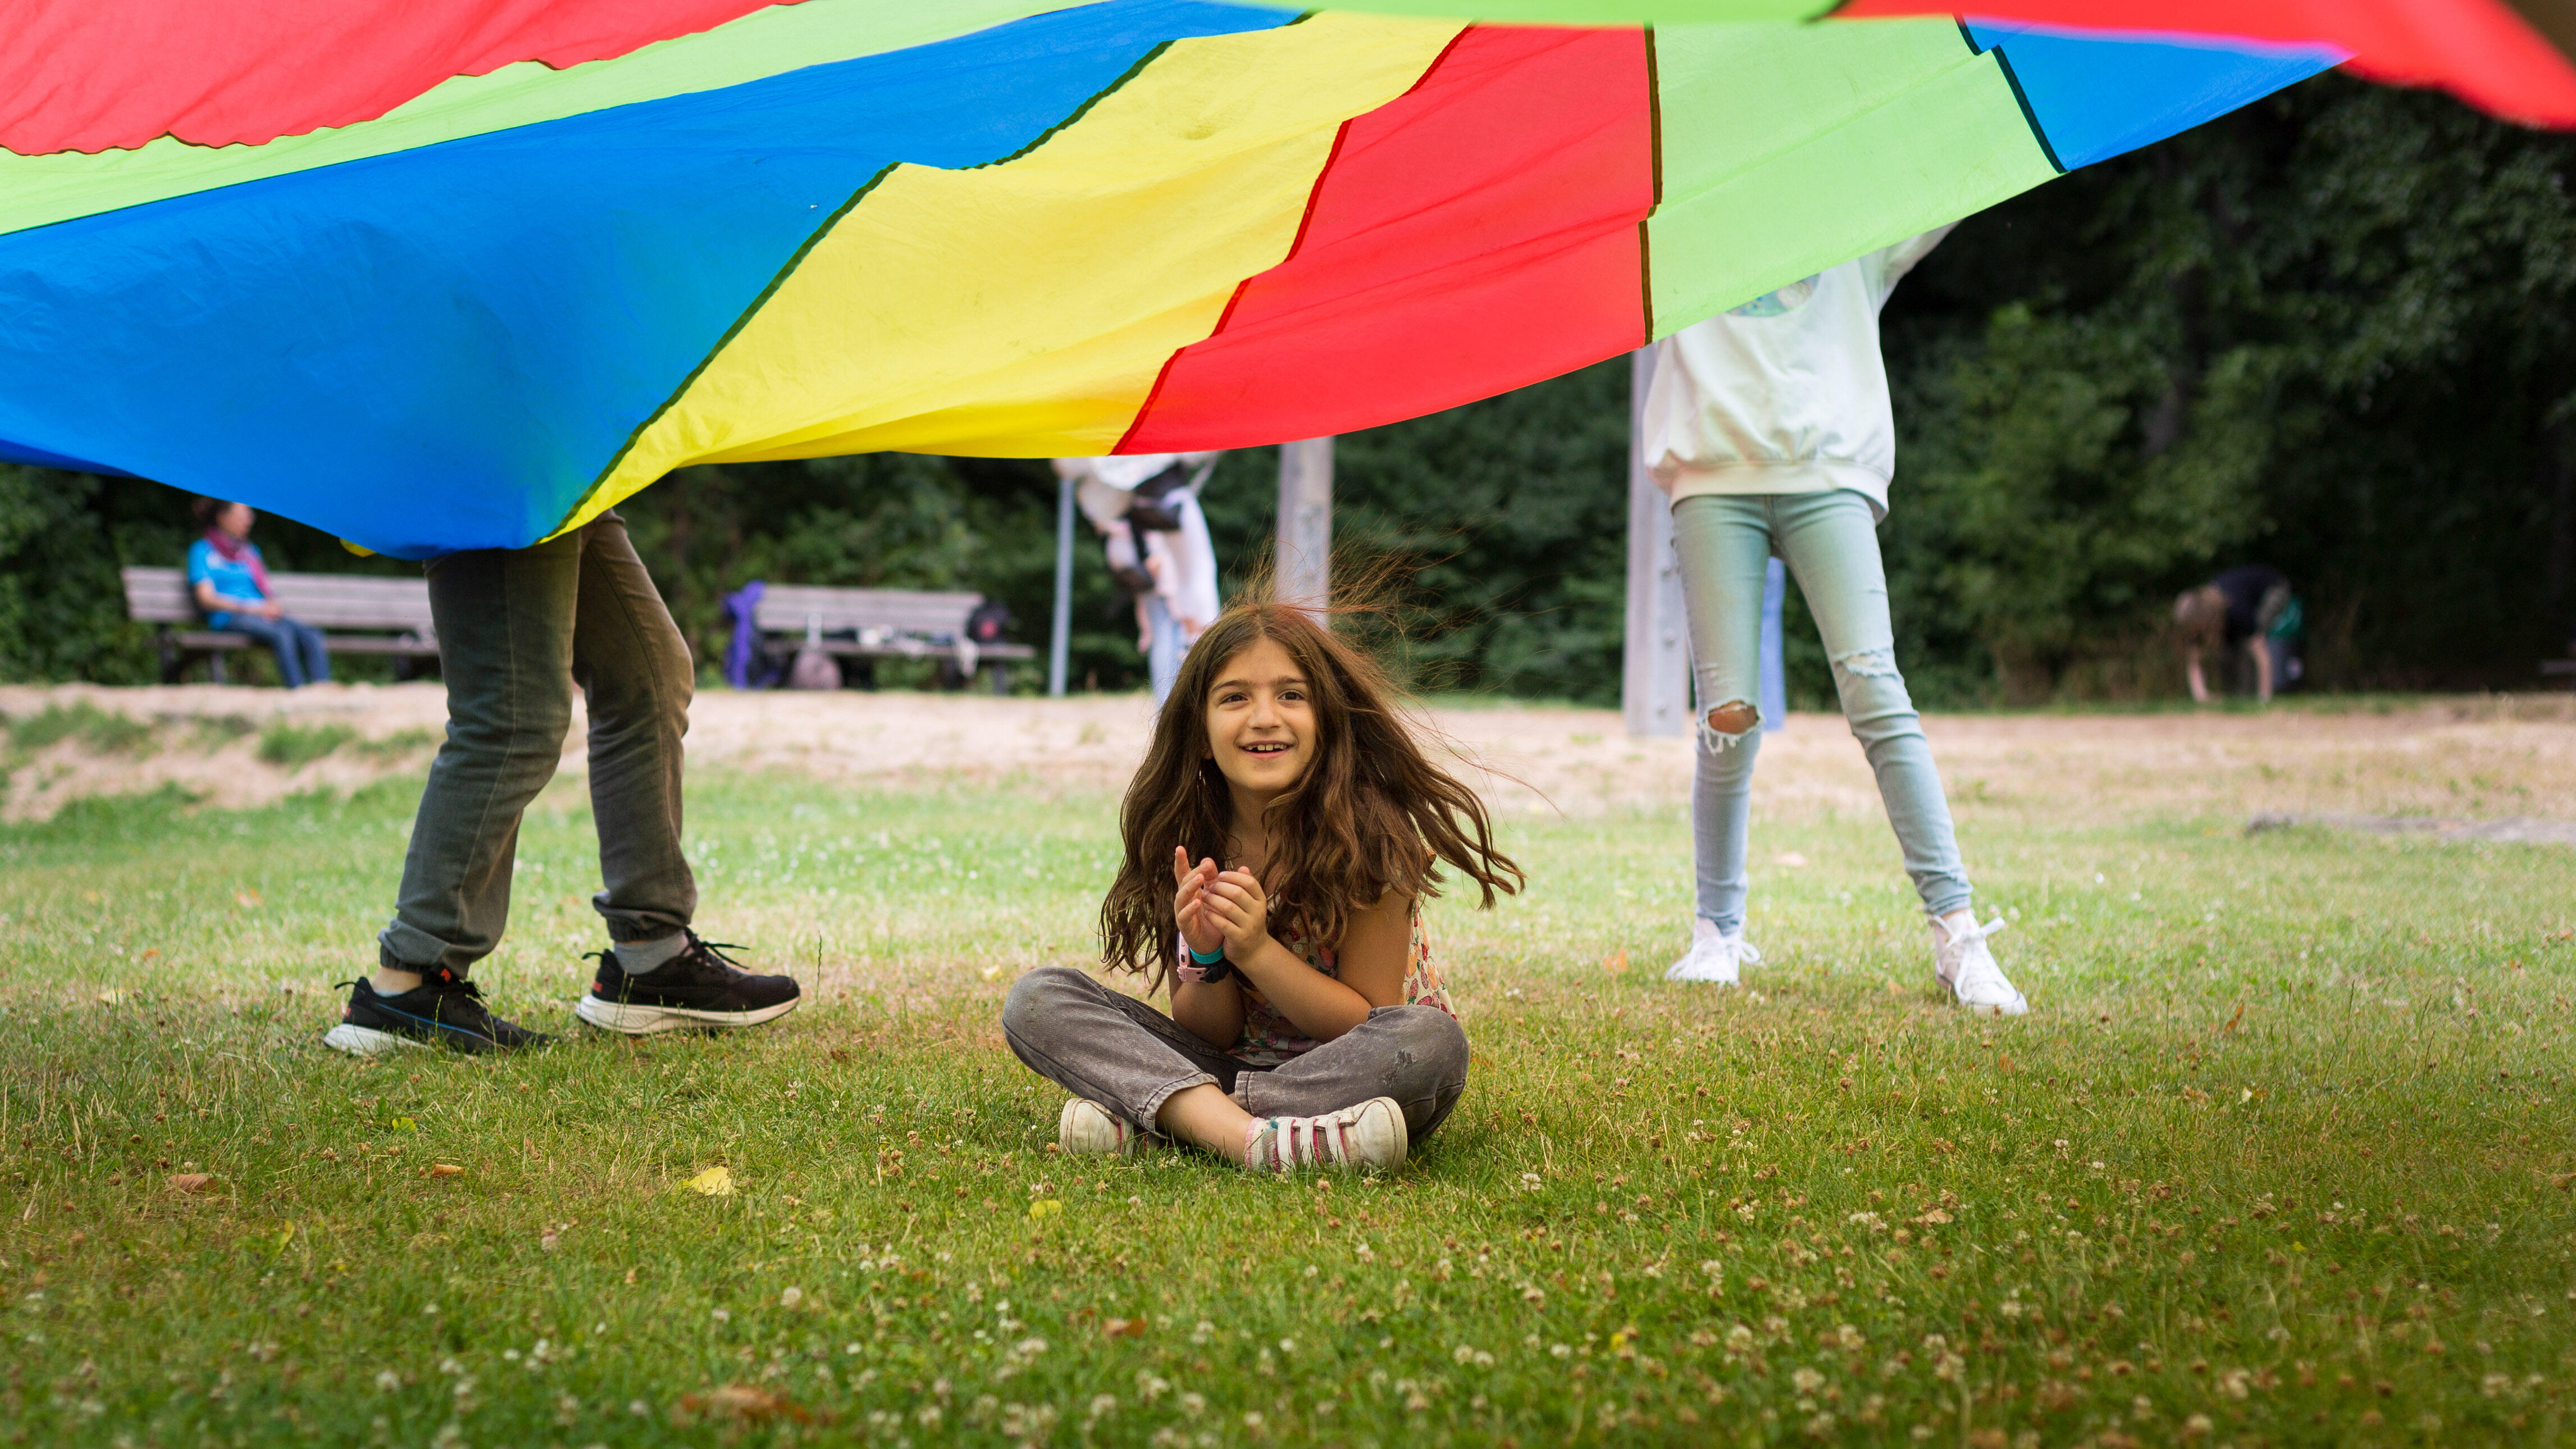 A girl sits under a colorful parachute while completing a group activity outdoors.